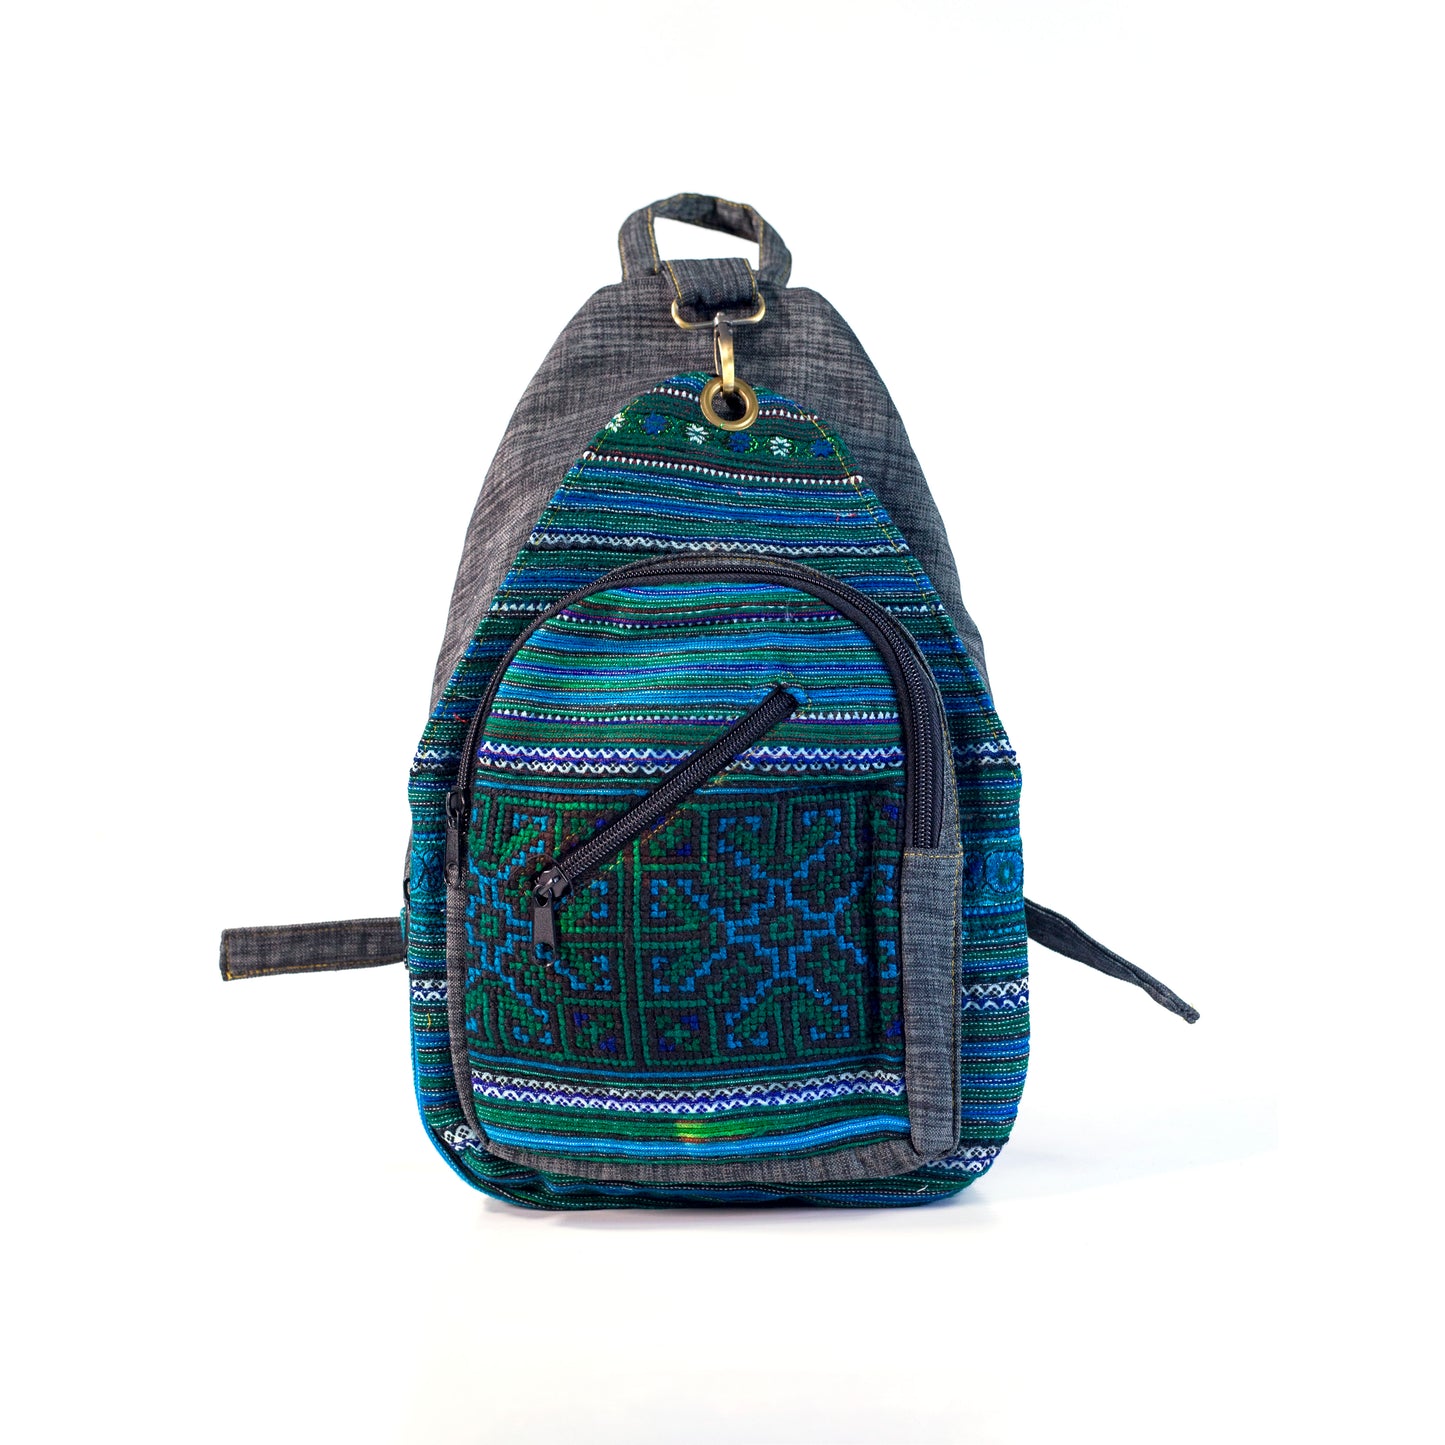 Multi-purpose backpack and sling, blue hand-embroidery fabric, grey trim